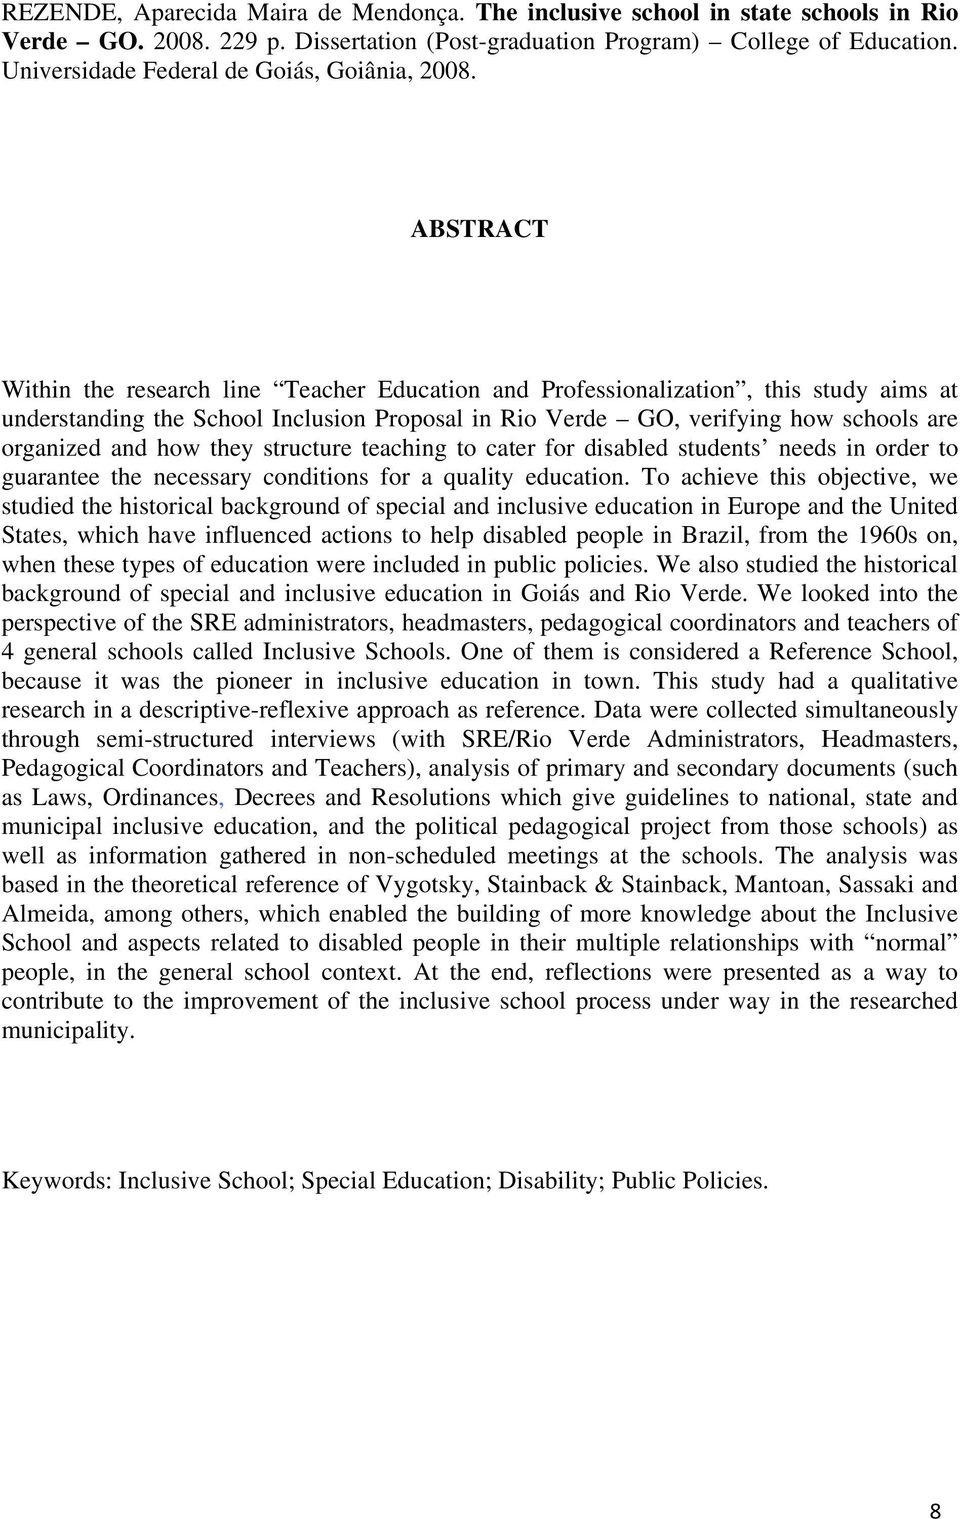 ABSTRACT Within the research line Teacher Education and Professionalization, this study aims at understanding the School Inclusion Proposal in Rio Verde GO, verifying how schools are organized and